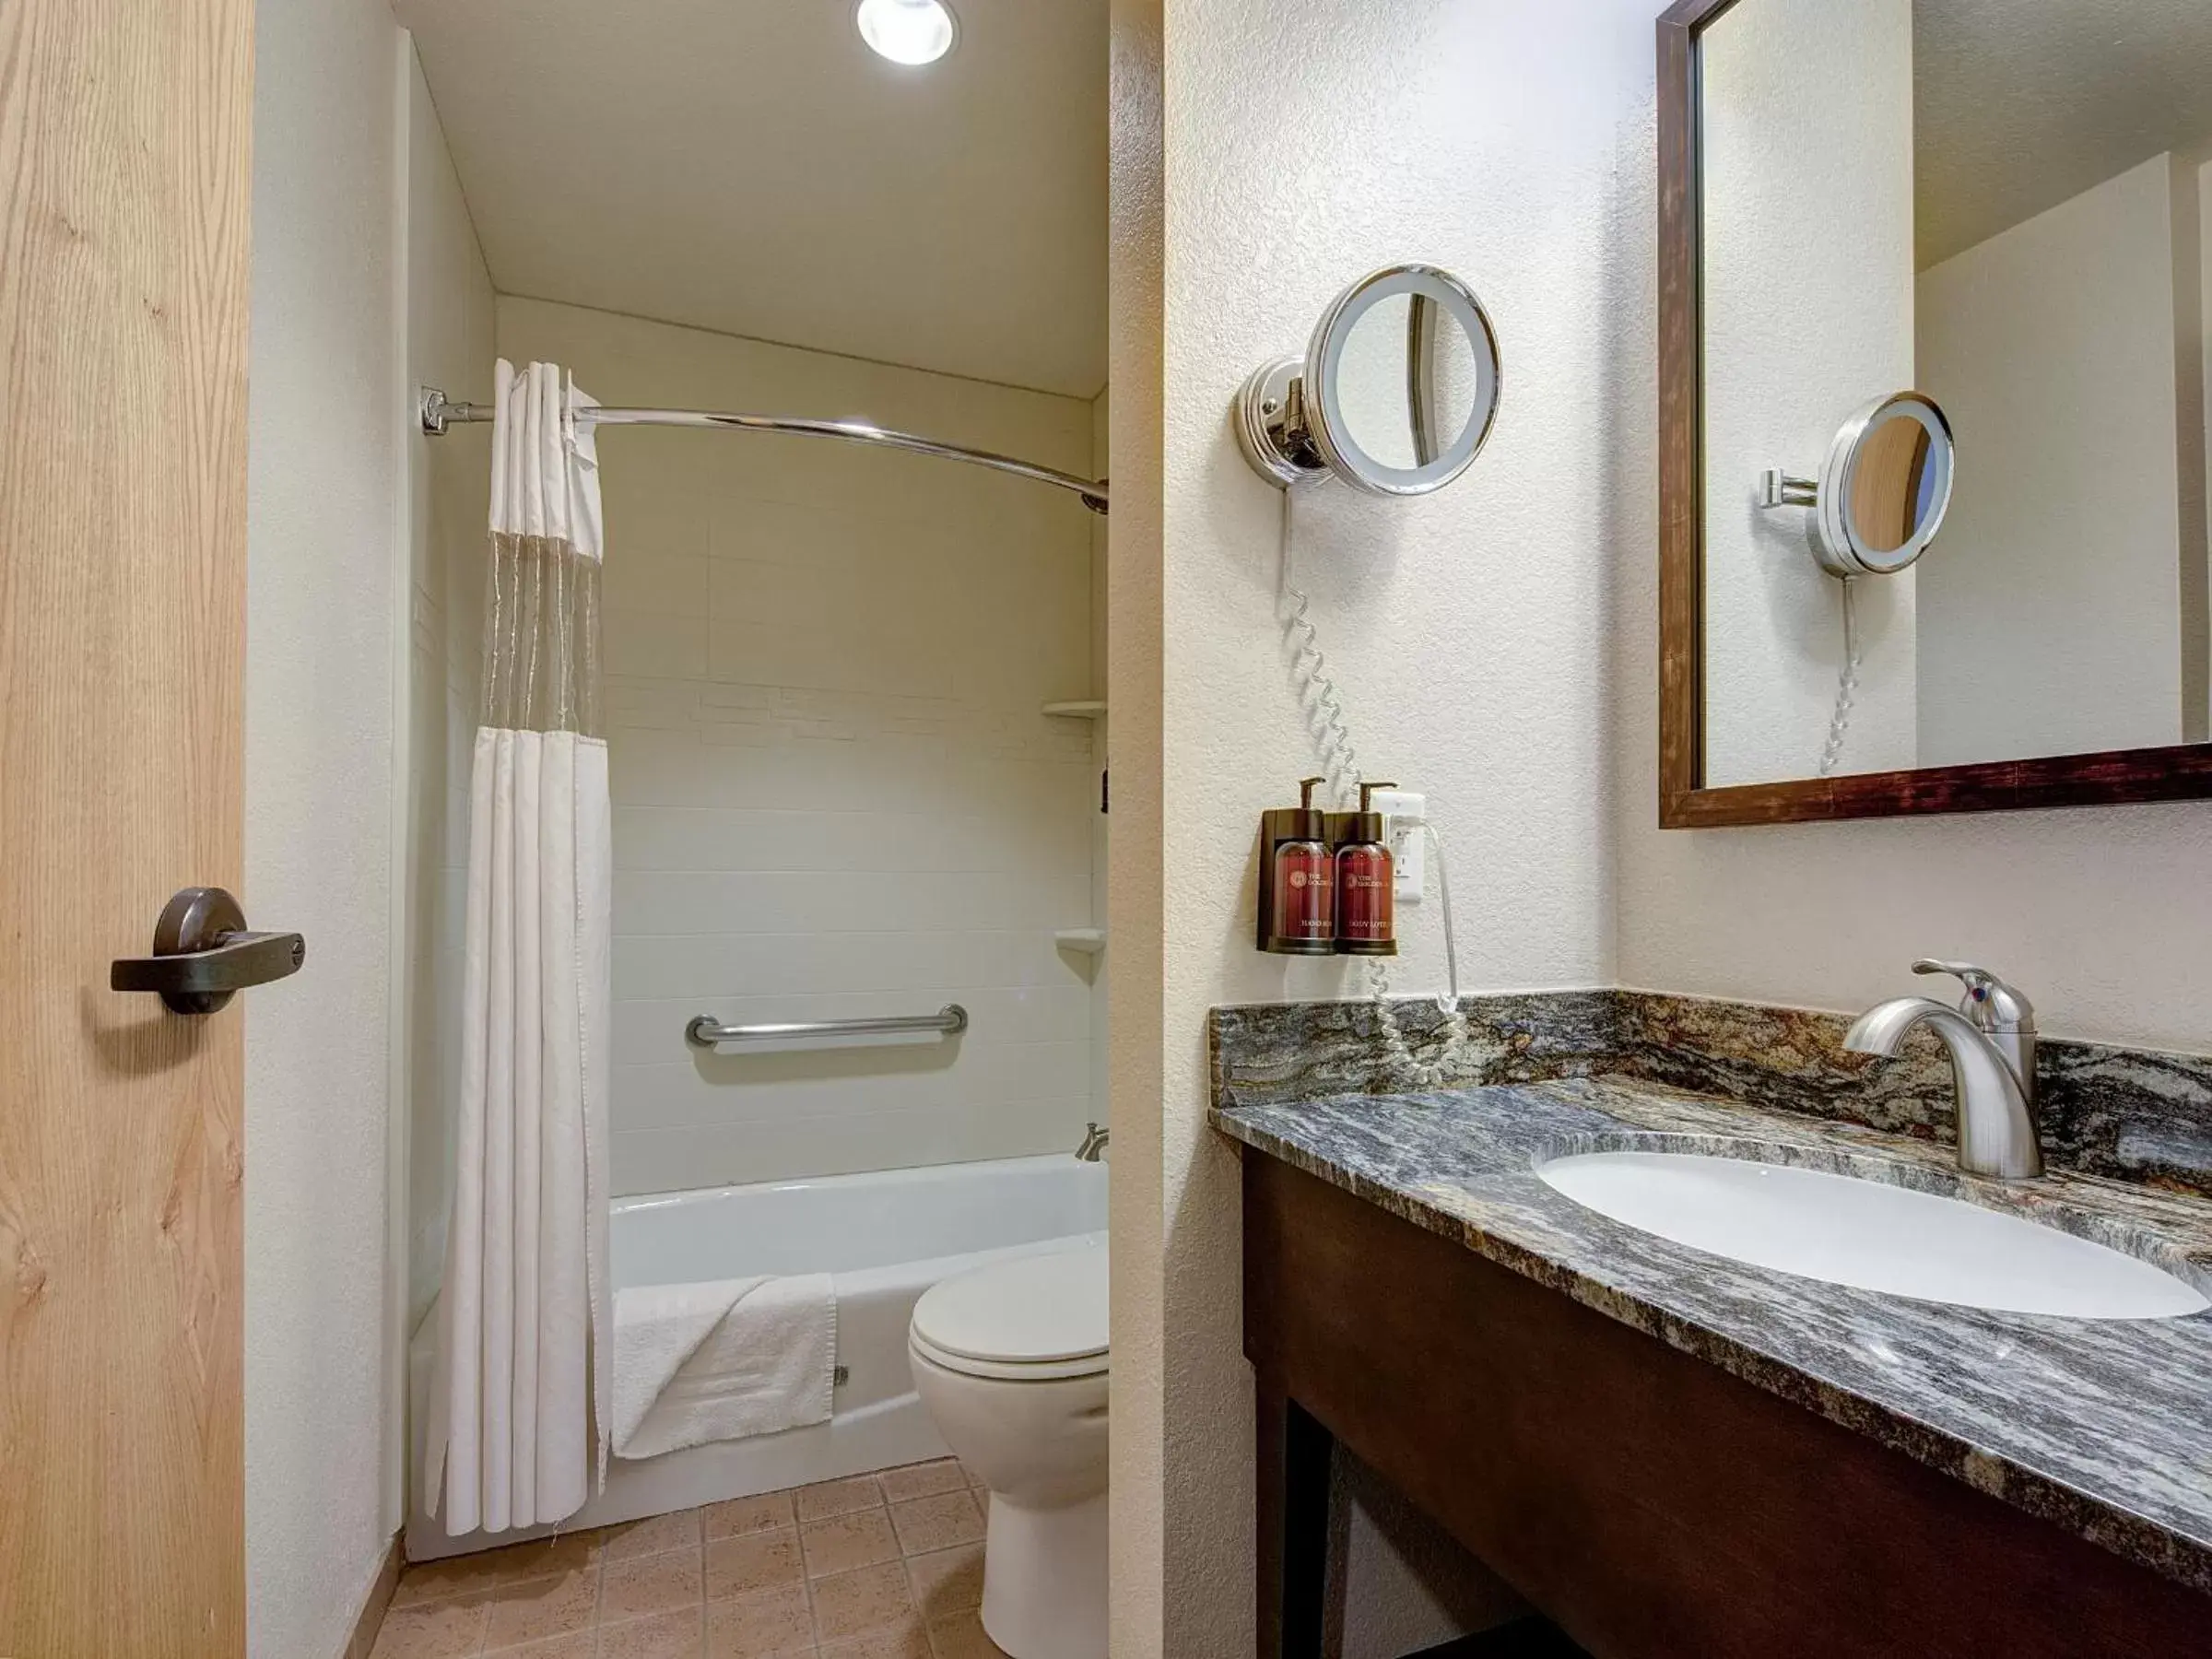 Bathroom in The Golden Hotel, Ascend Hotel Collection